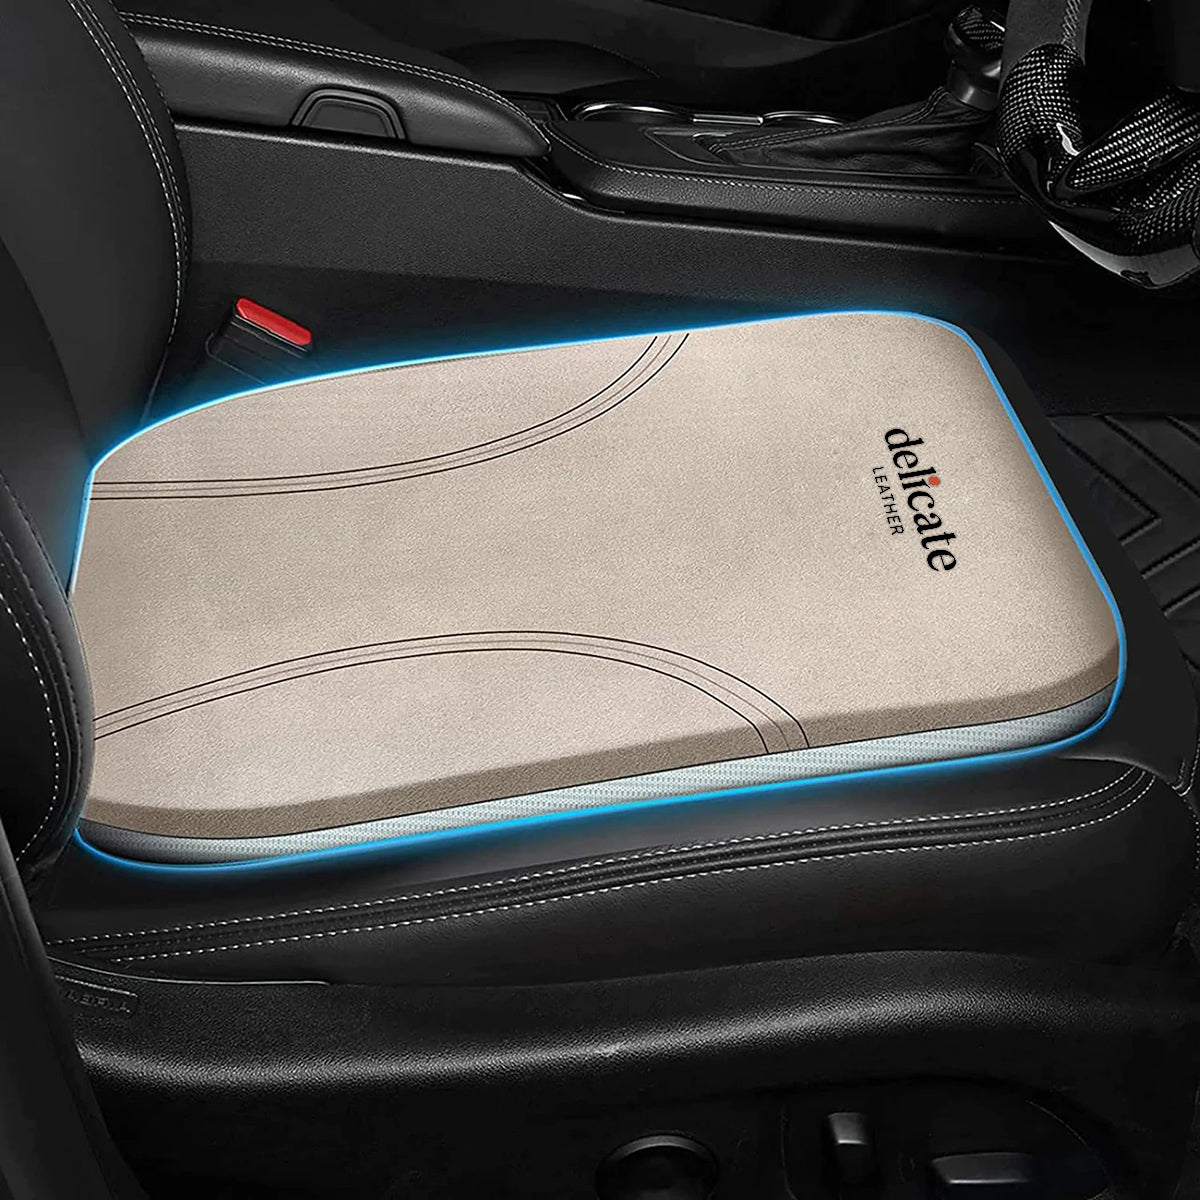 Cadillac Car Seat Cushion: Enhance Comfort and Support for Your Drive